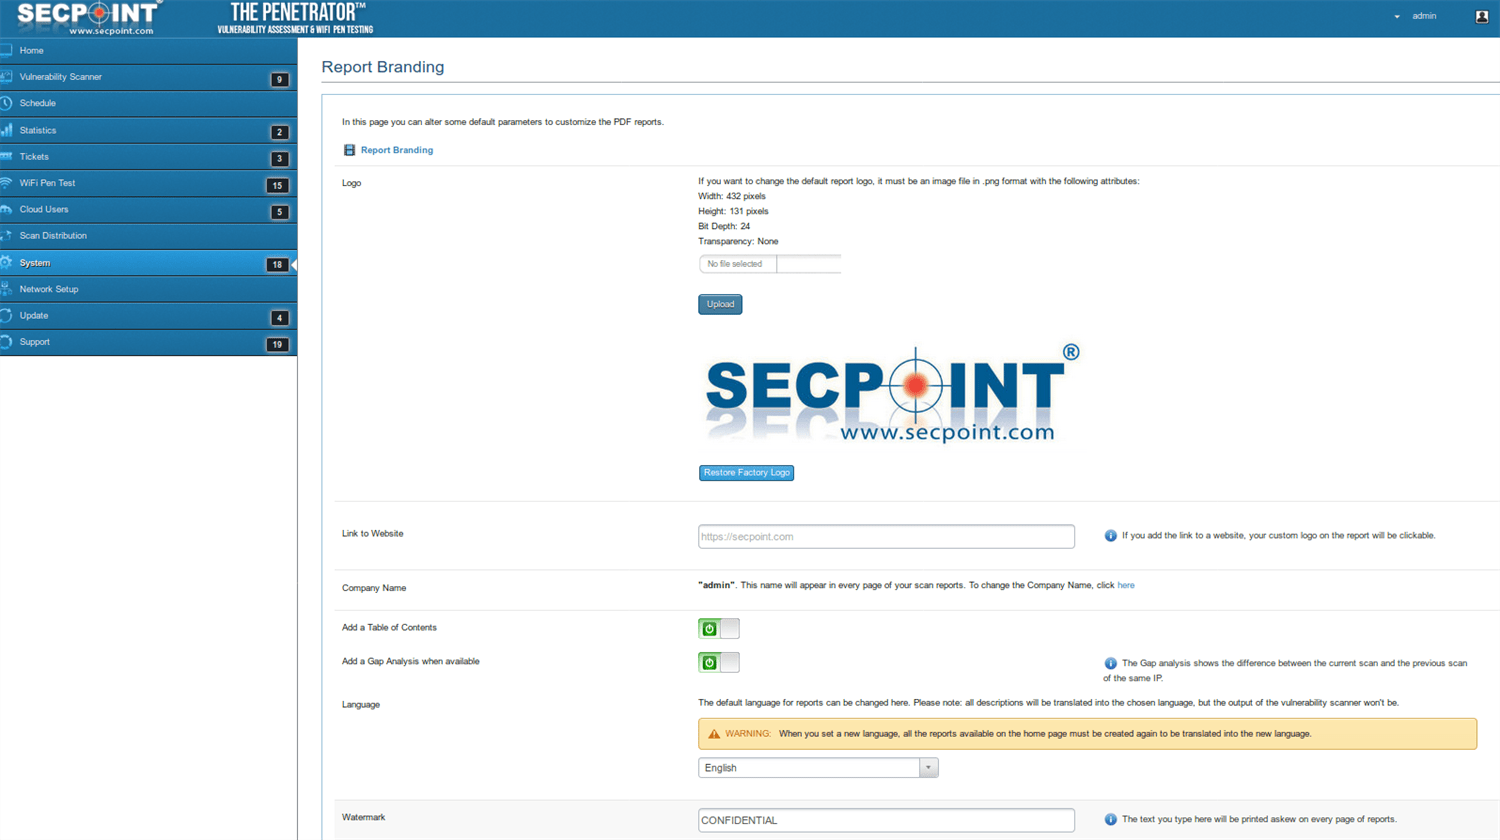 SecPoint Penetrator S9 - 2 IP Concurrent Scan License 1 Year Renewal - SecPoint